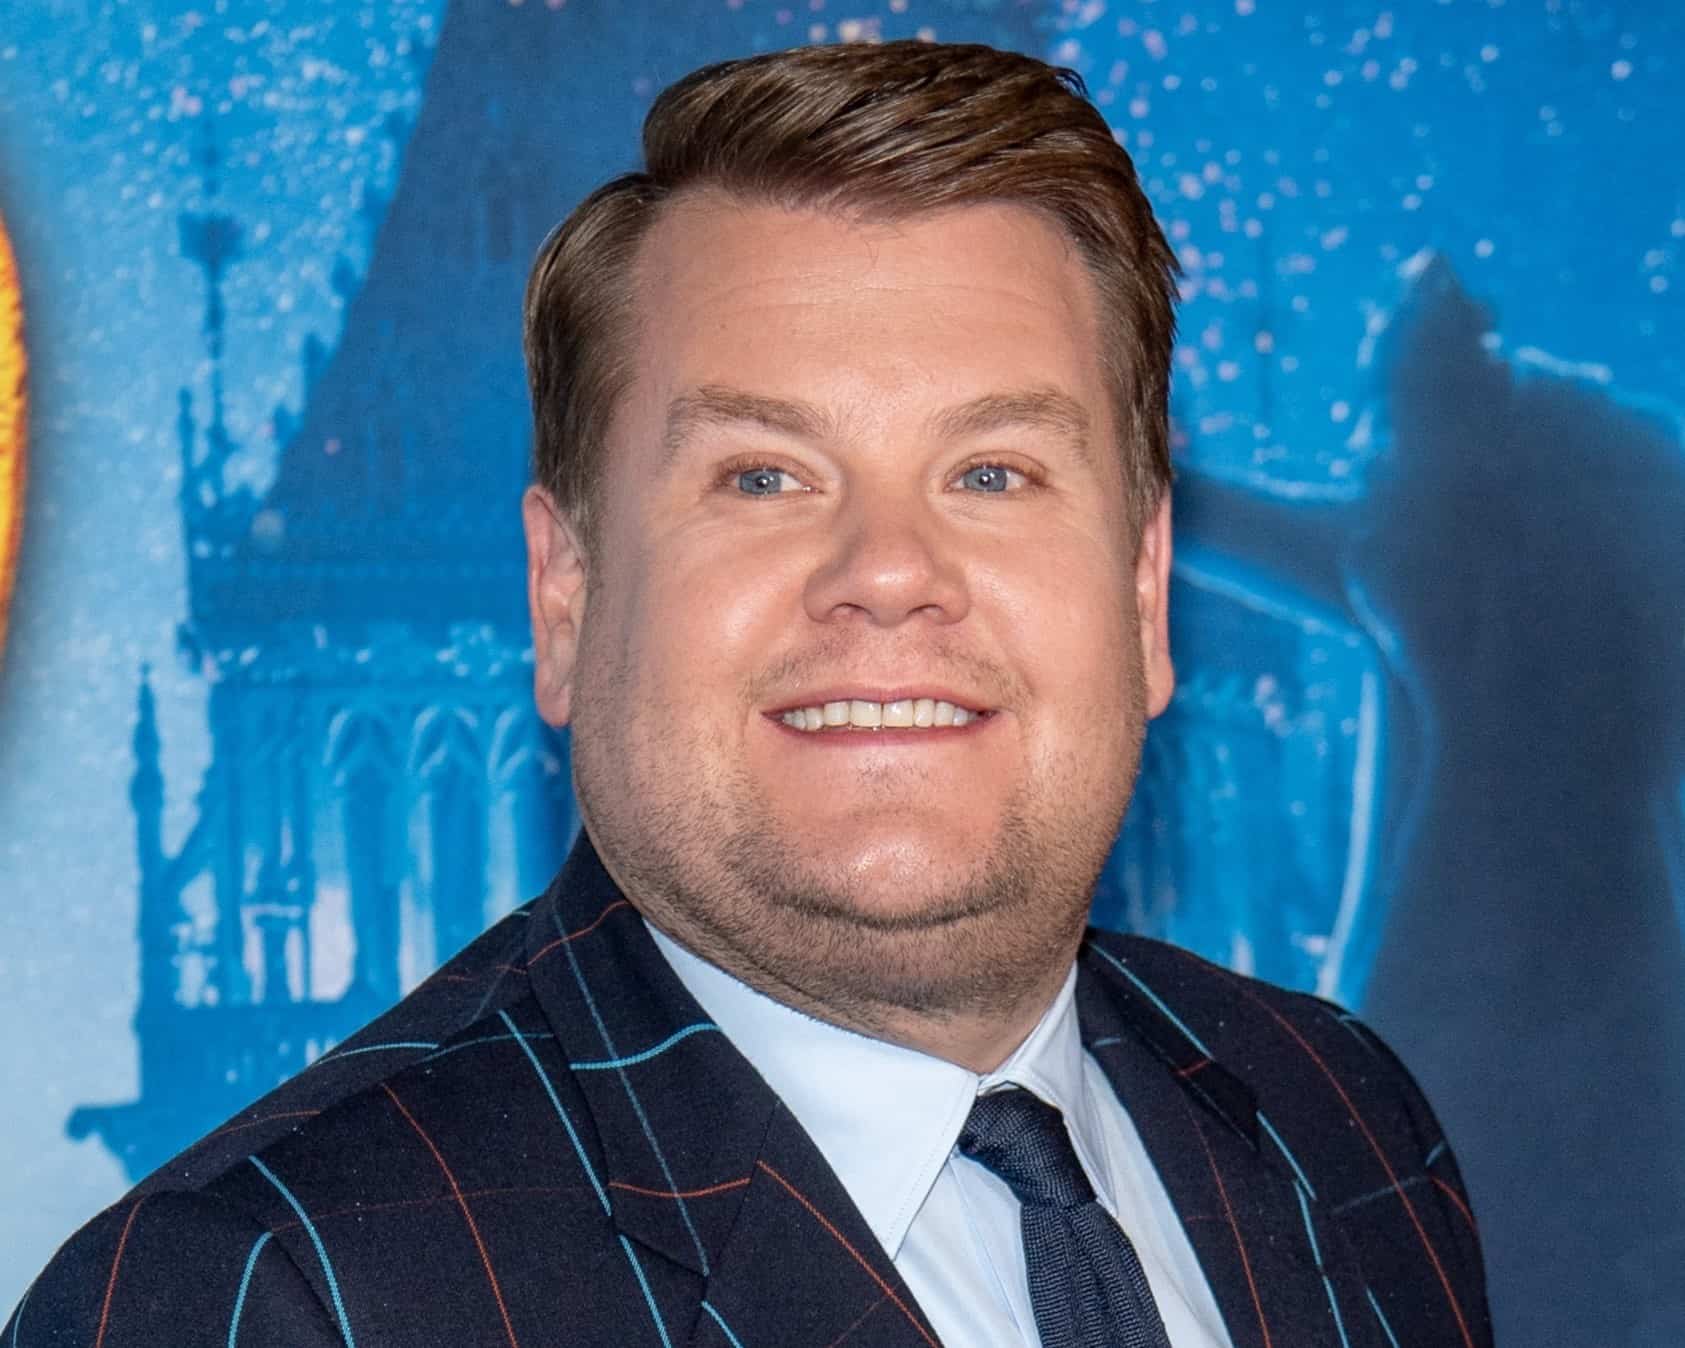 James Corden and his wife have sold their Los Angeles mansion for $17,125,000